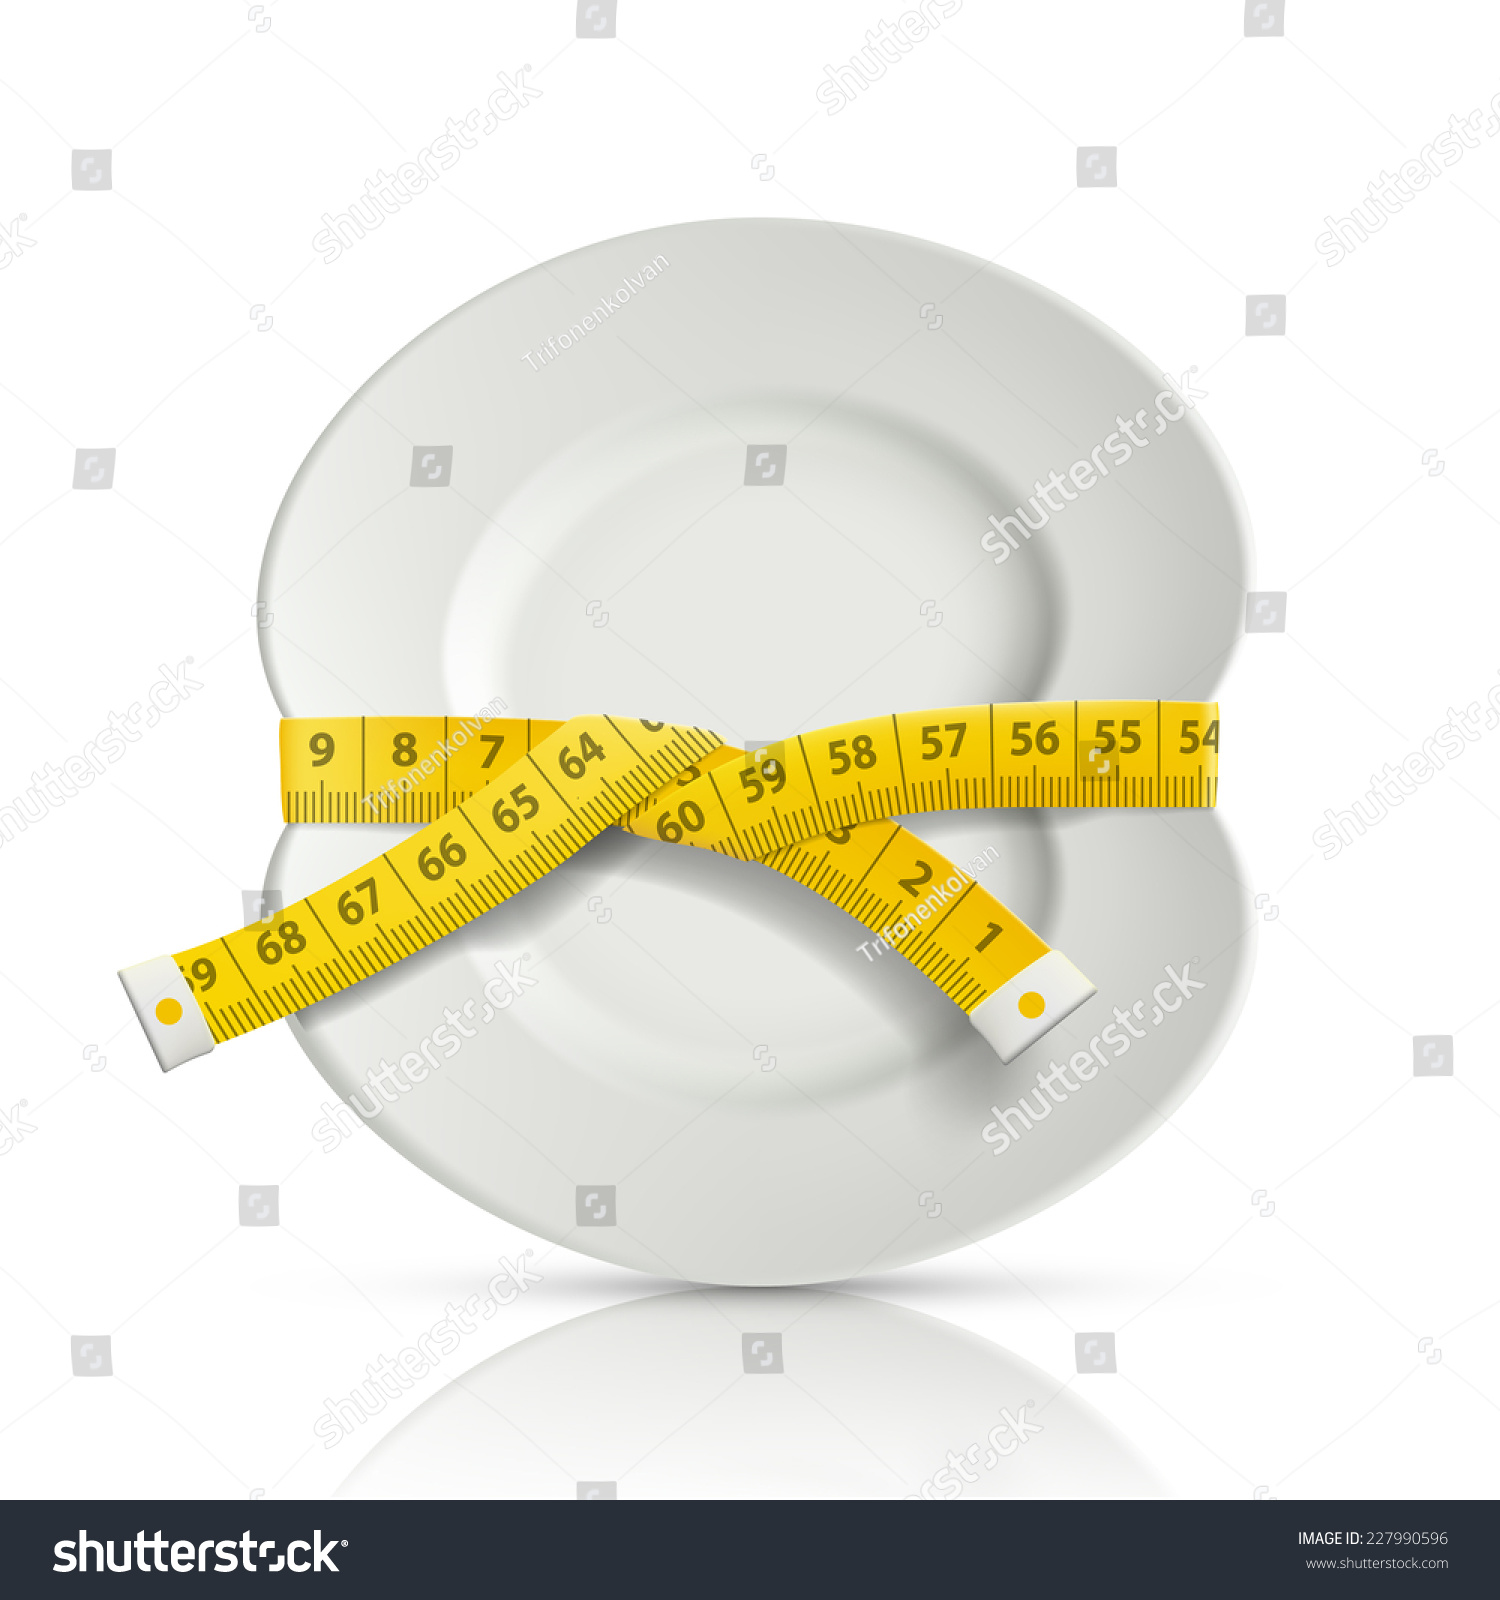 SVG of tailor centimeter around the plate svg